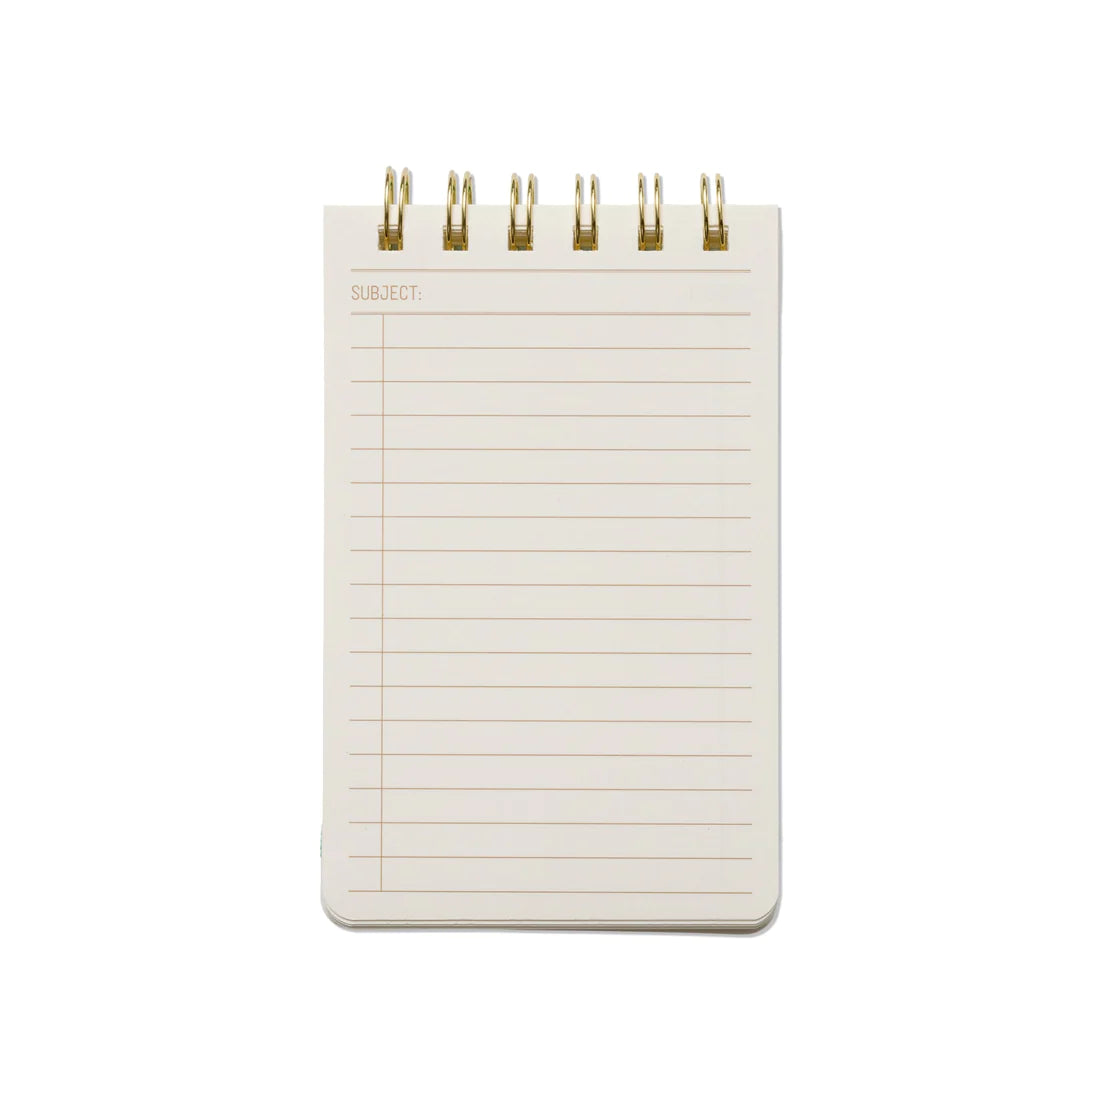 Live By The Sun Cloth Covered Luxury Jotter Notepad